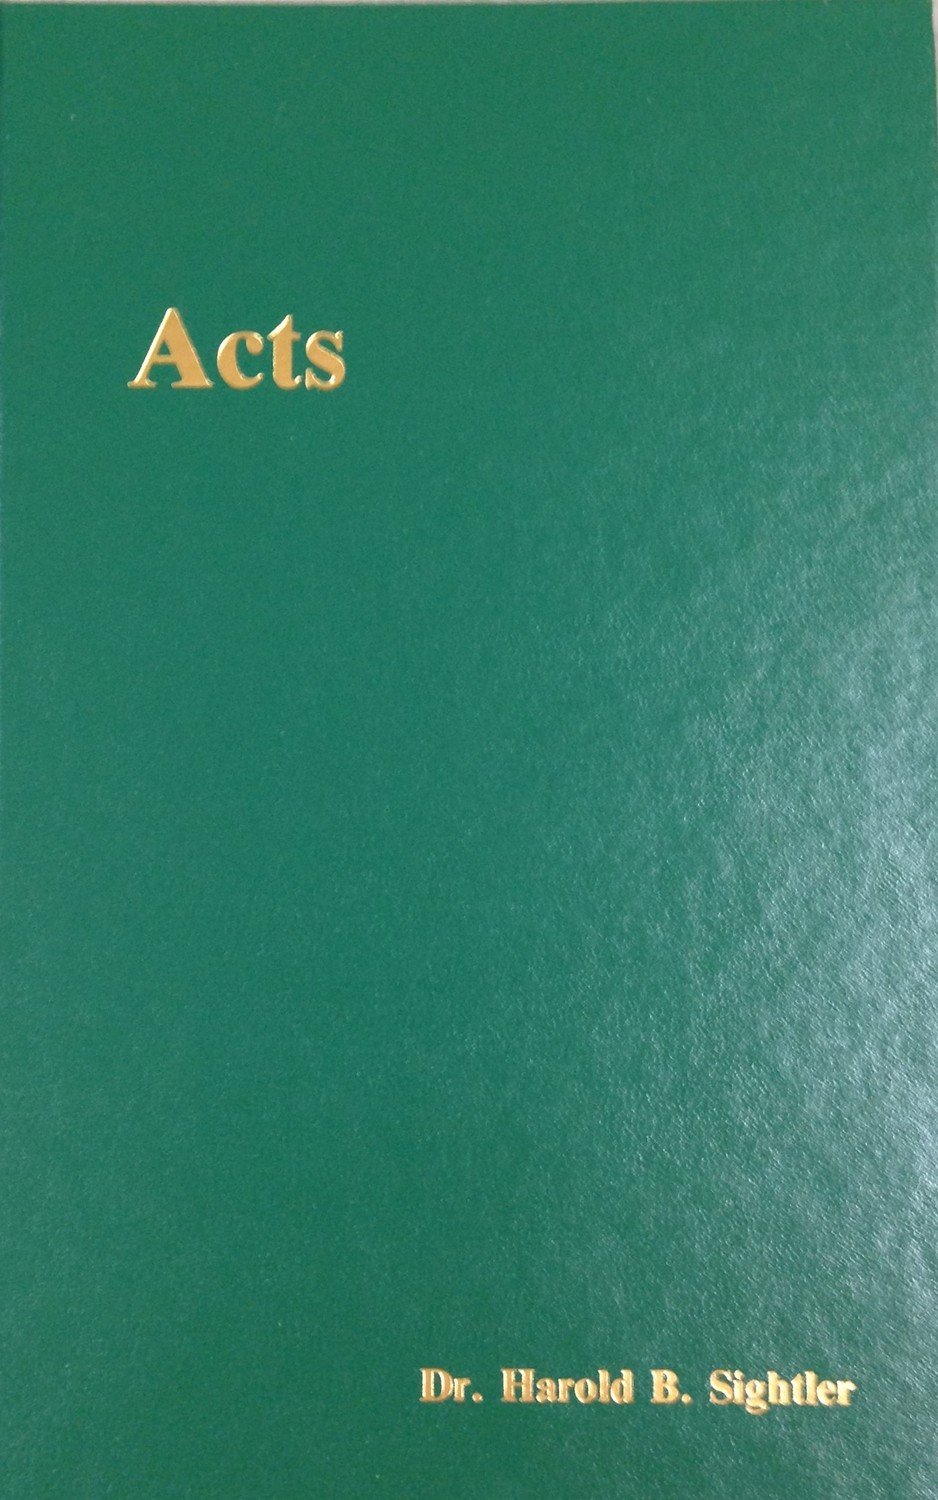 Acts by Dr. Harold B. Sightler